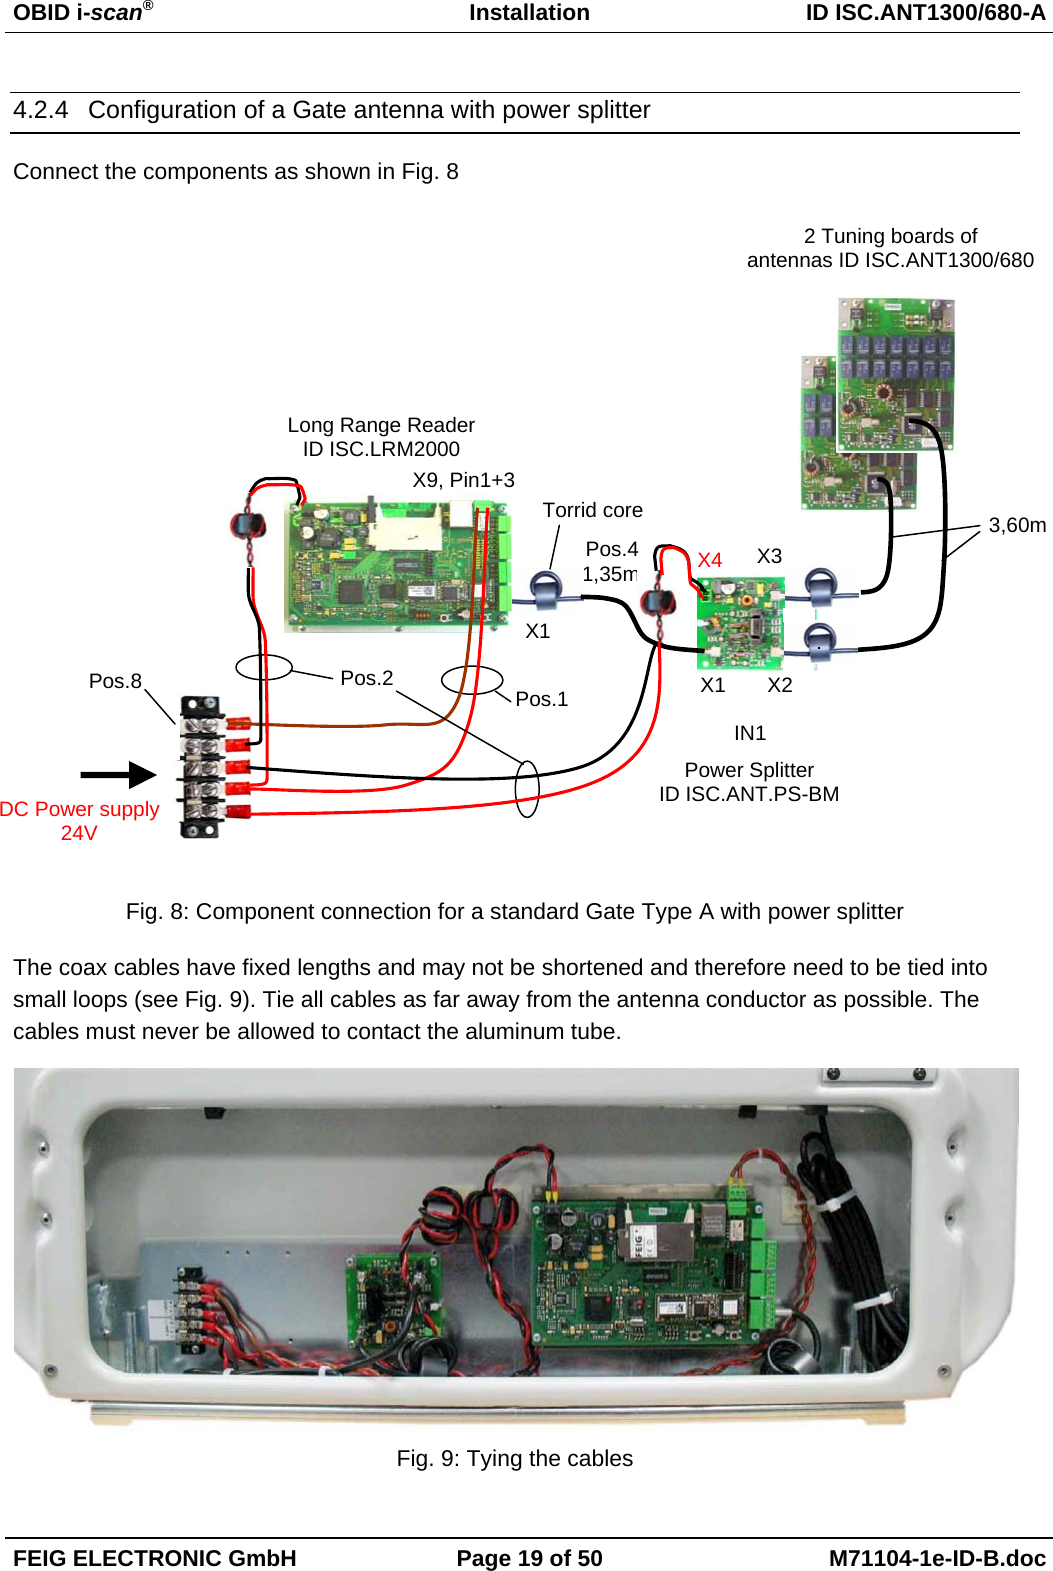 OBID i-scan®Installation ID ISC.ANT1300/680-AFEIG ELECTRONIC GmbH Page 19 of 50 M71104-1e-ID-B.doc4.2.4  Configuration of a Gate antenna with power splitterConnect the components as shown in Fig. 8Fig. 8: Component connection for a standard Gate Type A with power splitterThe coax cables have fixed lengths and may not be shortened and therefore need to be tied intosmall loops (see Fig. 9). Tie all cables as far away from the antenna conductor as possible. Thecables must never be allowed to contact the aluminum tube.Fig. 9: Tying the cablesX2X3X13,60m2 Tuning boards ofantennas ID ISC.ANT1300/680Power SplitterID ISC.ANT.PS-BMX11,35m X4Torrid coreLong Range ReaderID ISC.LRM2000IN1X9, Pin1+3DC Power supply24VPos.1Pos.2Pos.4Pos.8